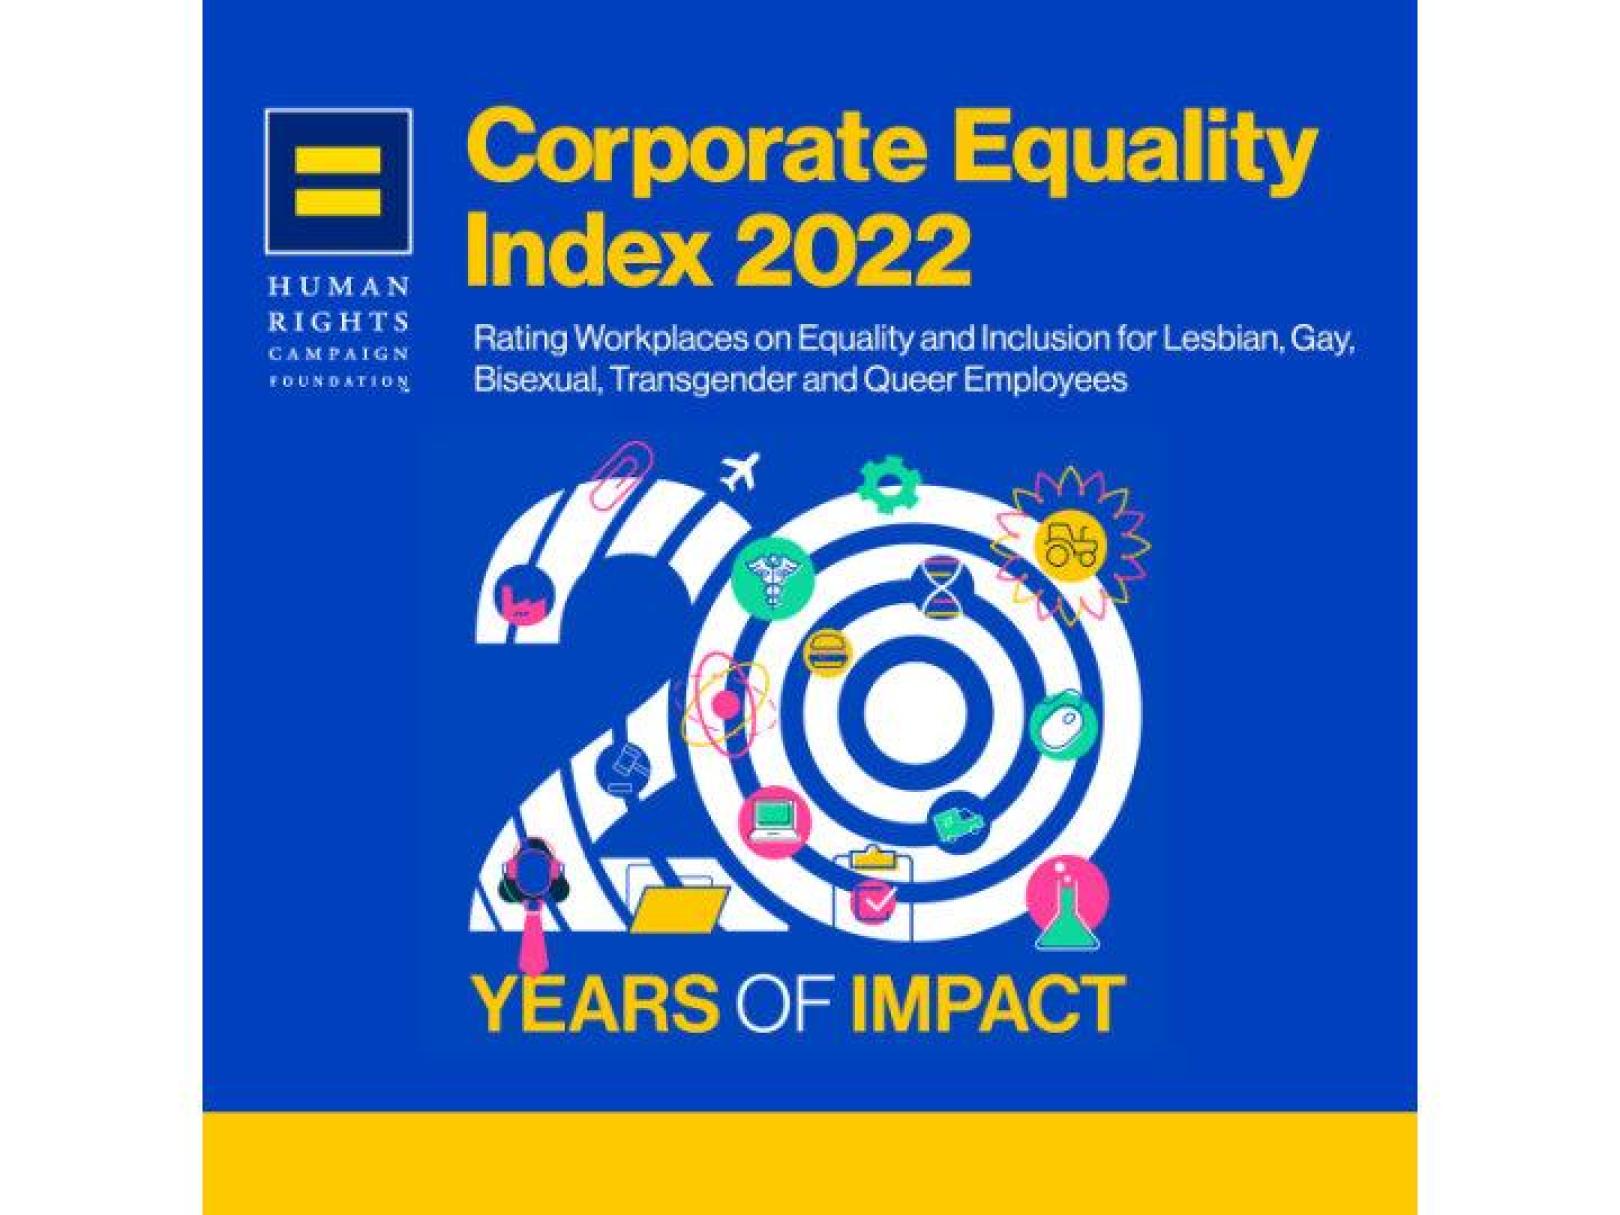 Human Rights Campaign Foundation's Corporate Equality Index